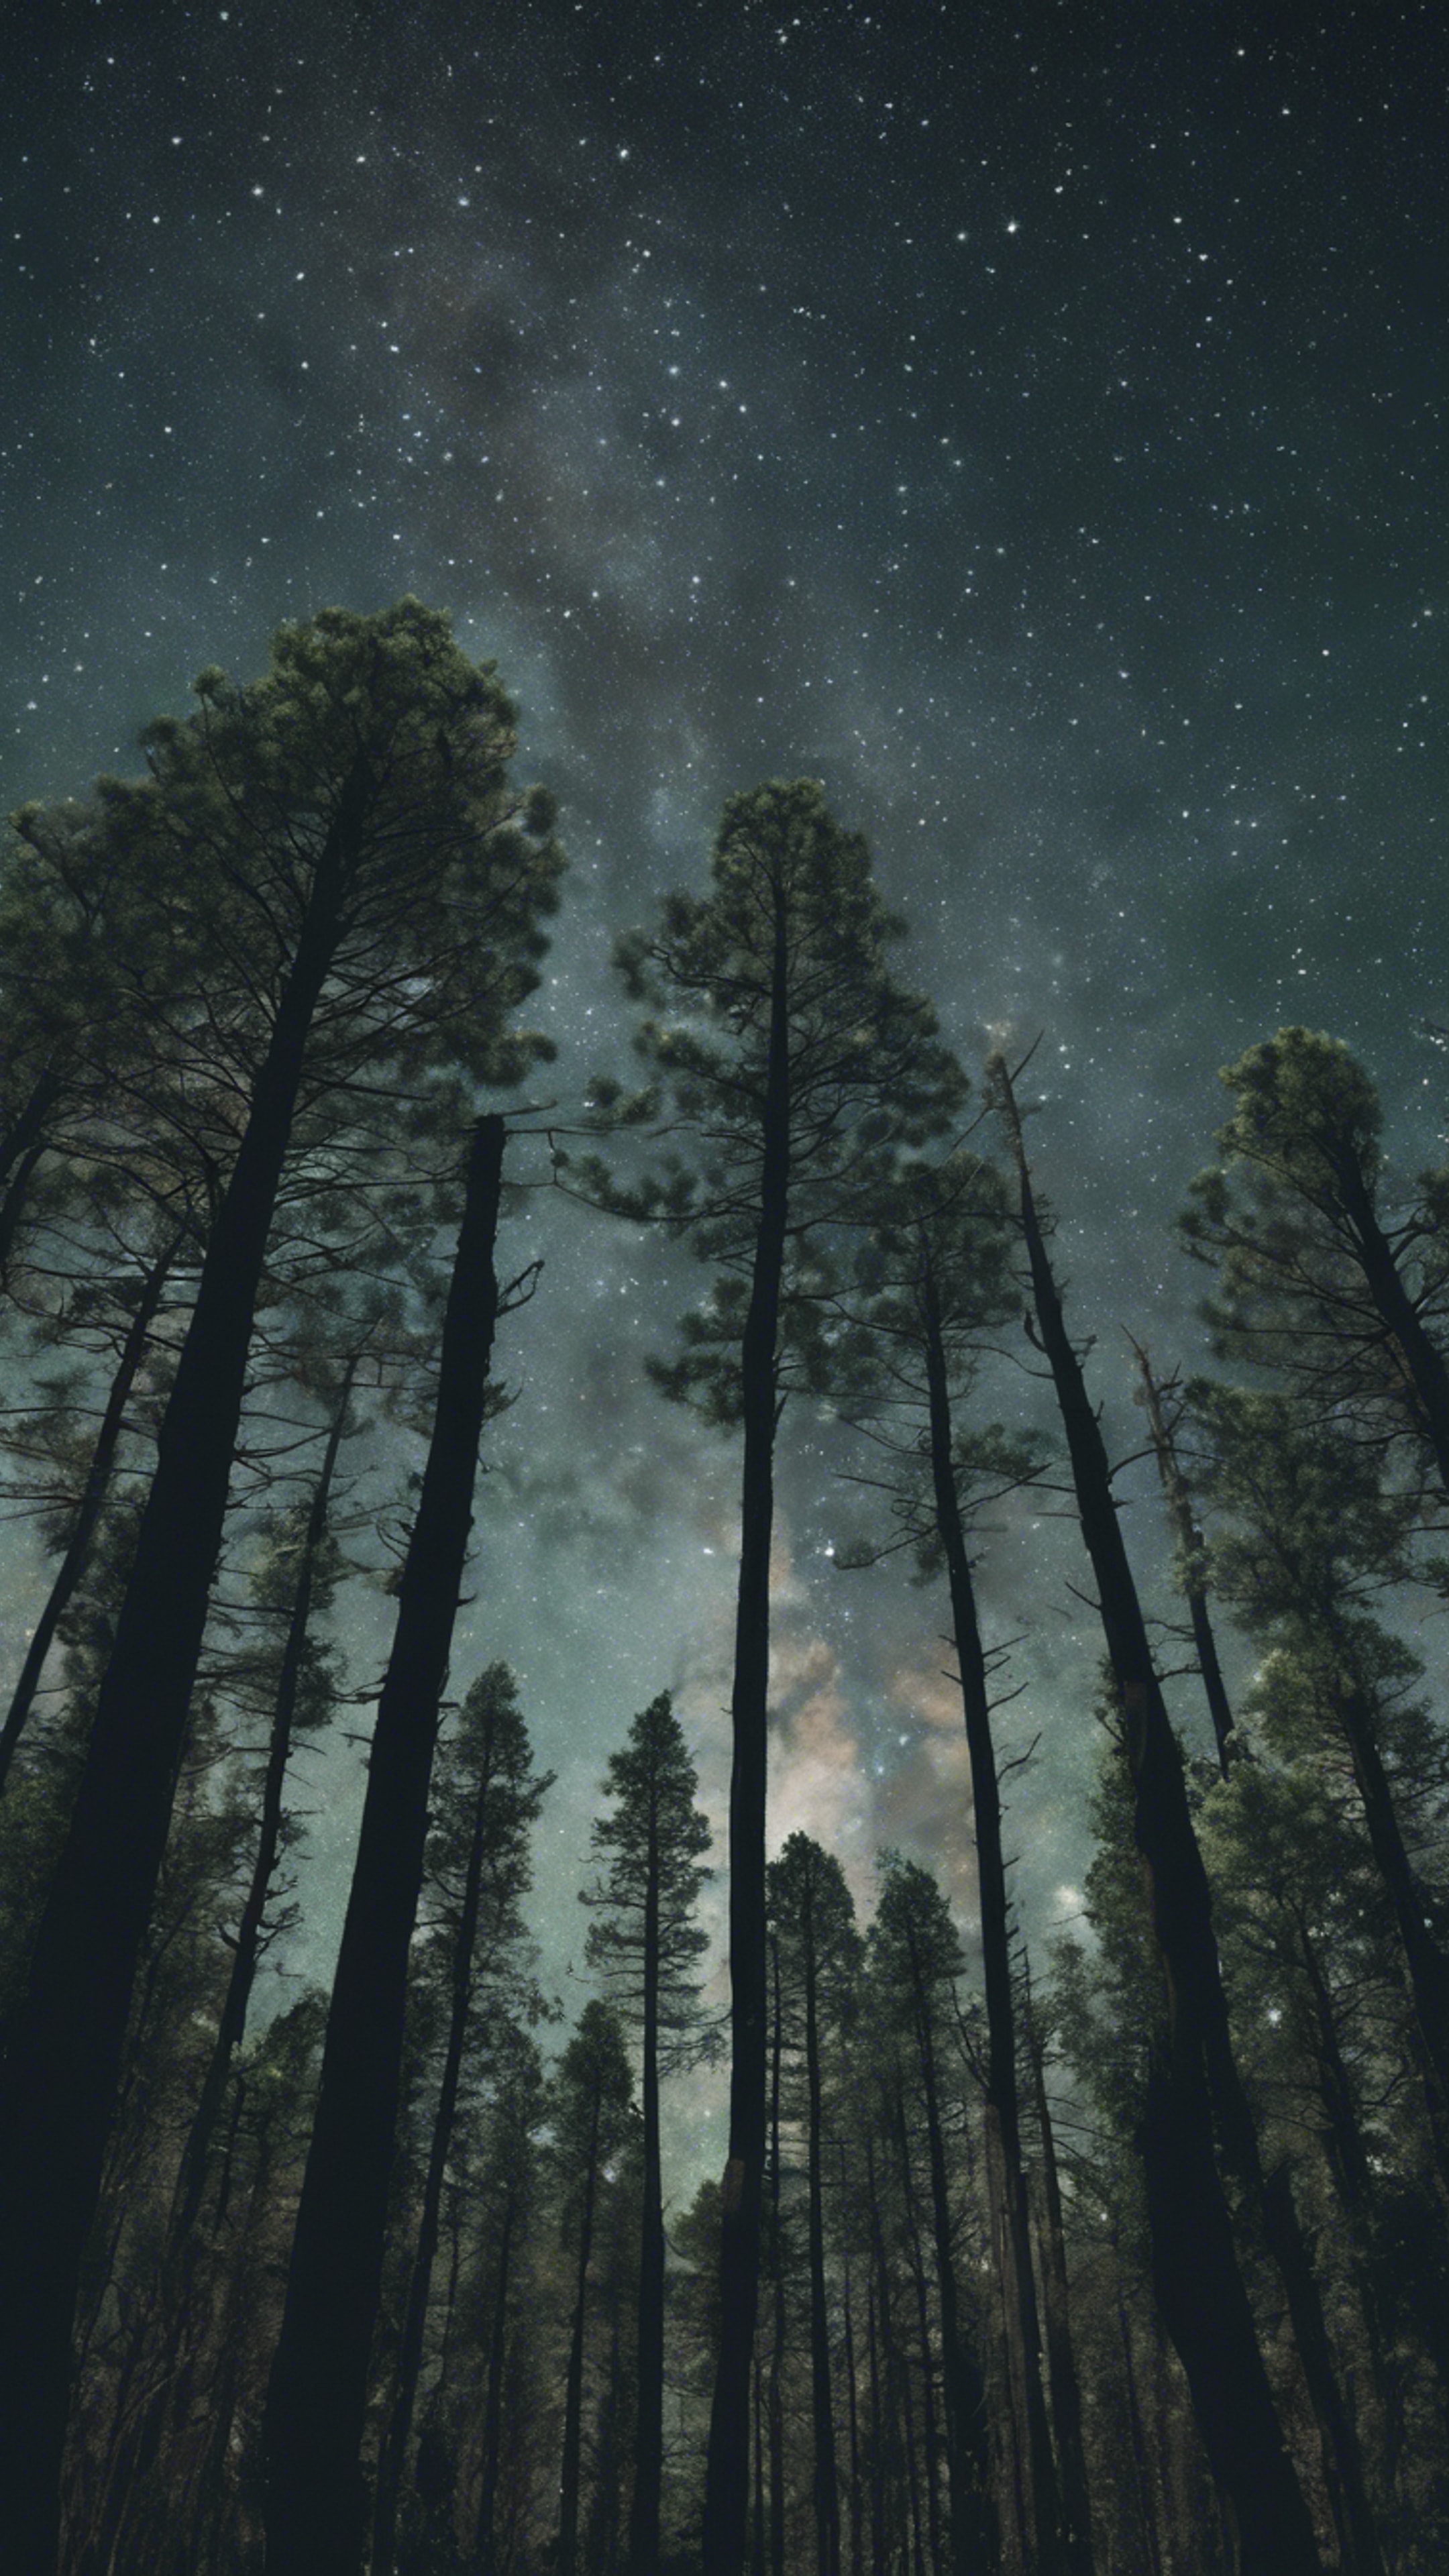 A wilderness scene with tall, dark green pine trees occluding the stars. Wallpaper[a450718e497a48169b60]